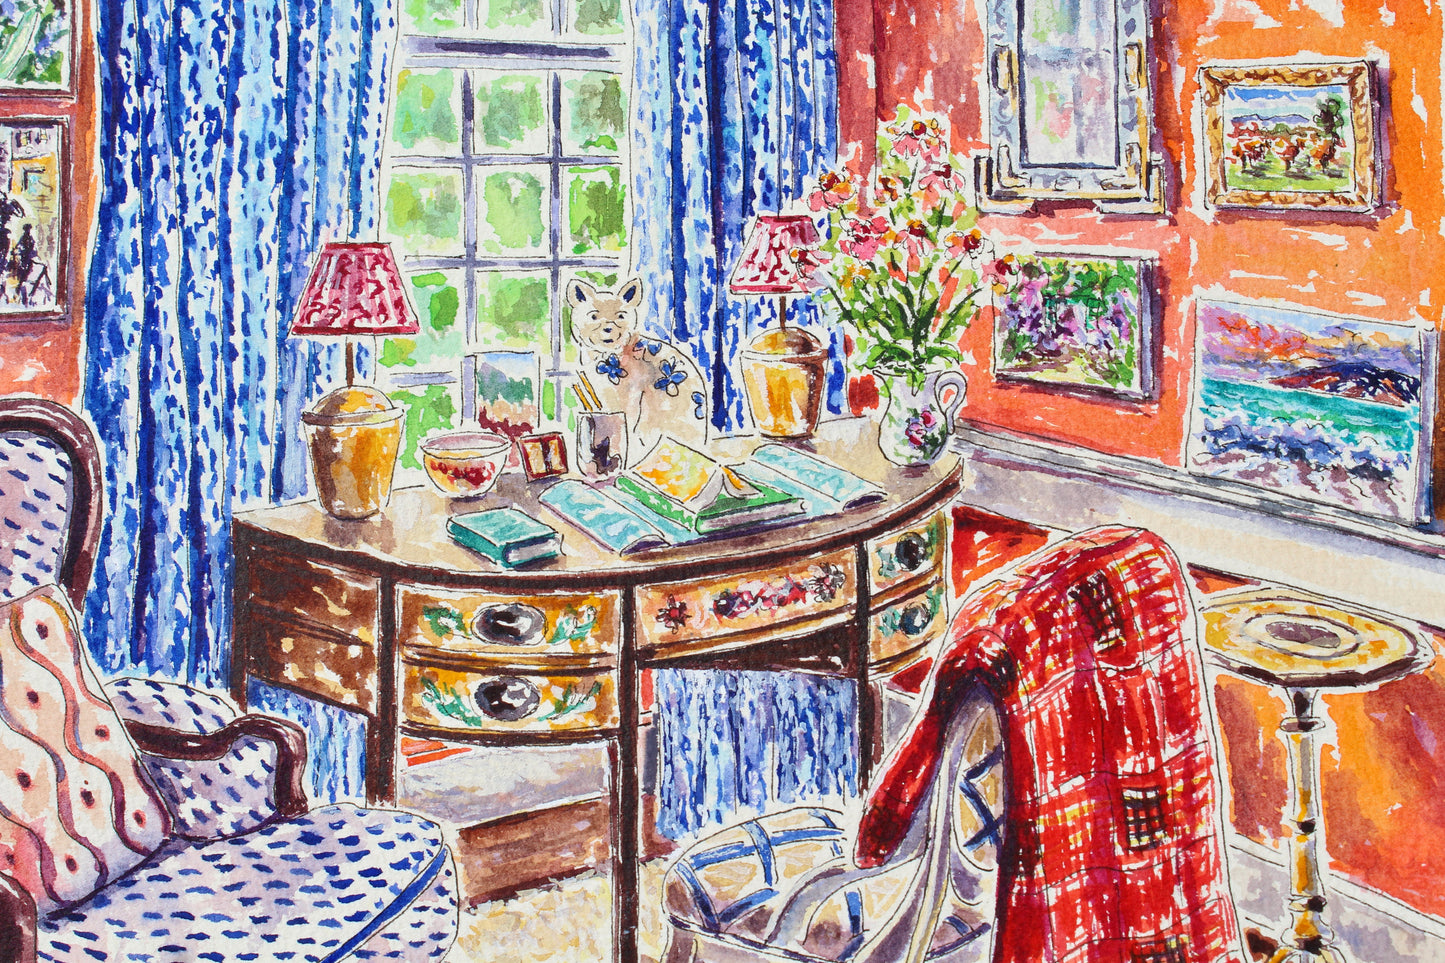 Memories, An Original 16" x 12" Watercolor And Ink Painting Of An Interior Scene With Blue And Orange